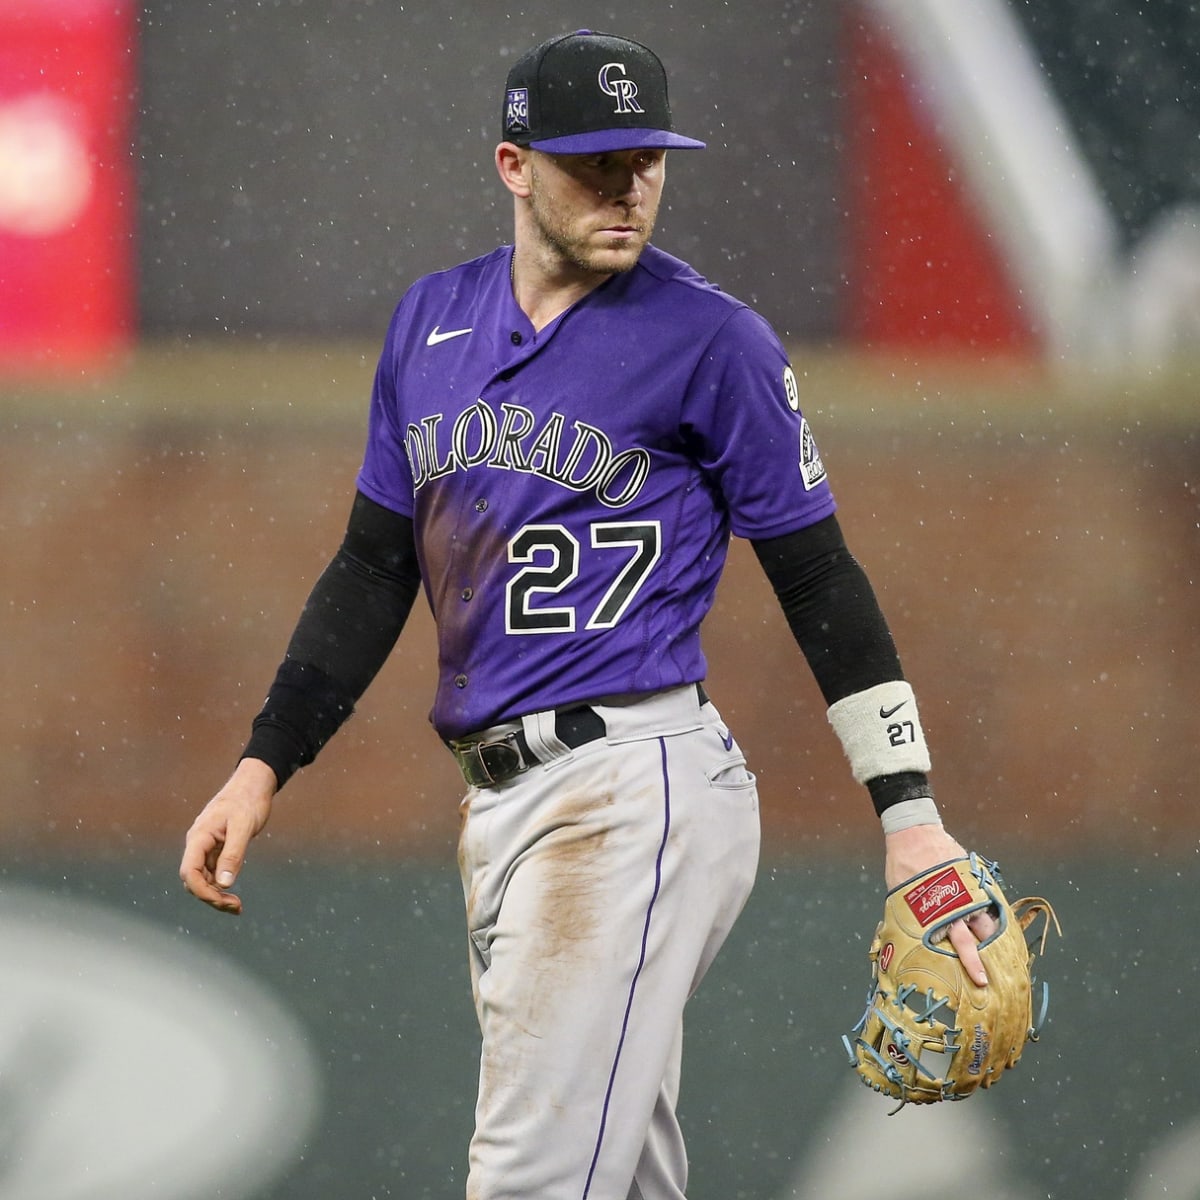 Trevor Story drawing strong interest from Yankees, Cardinals